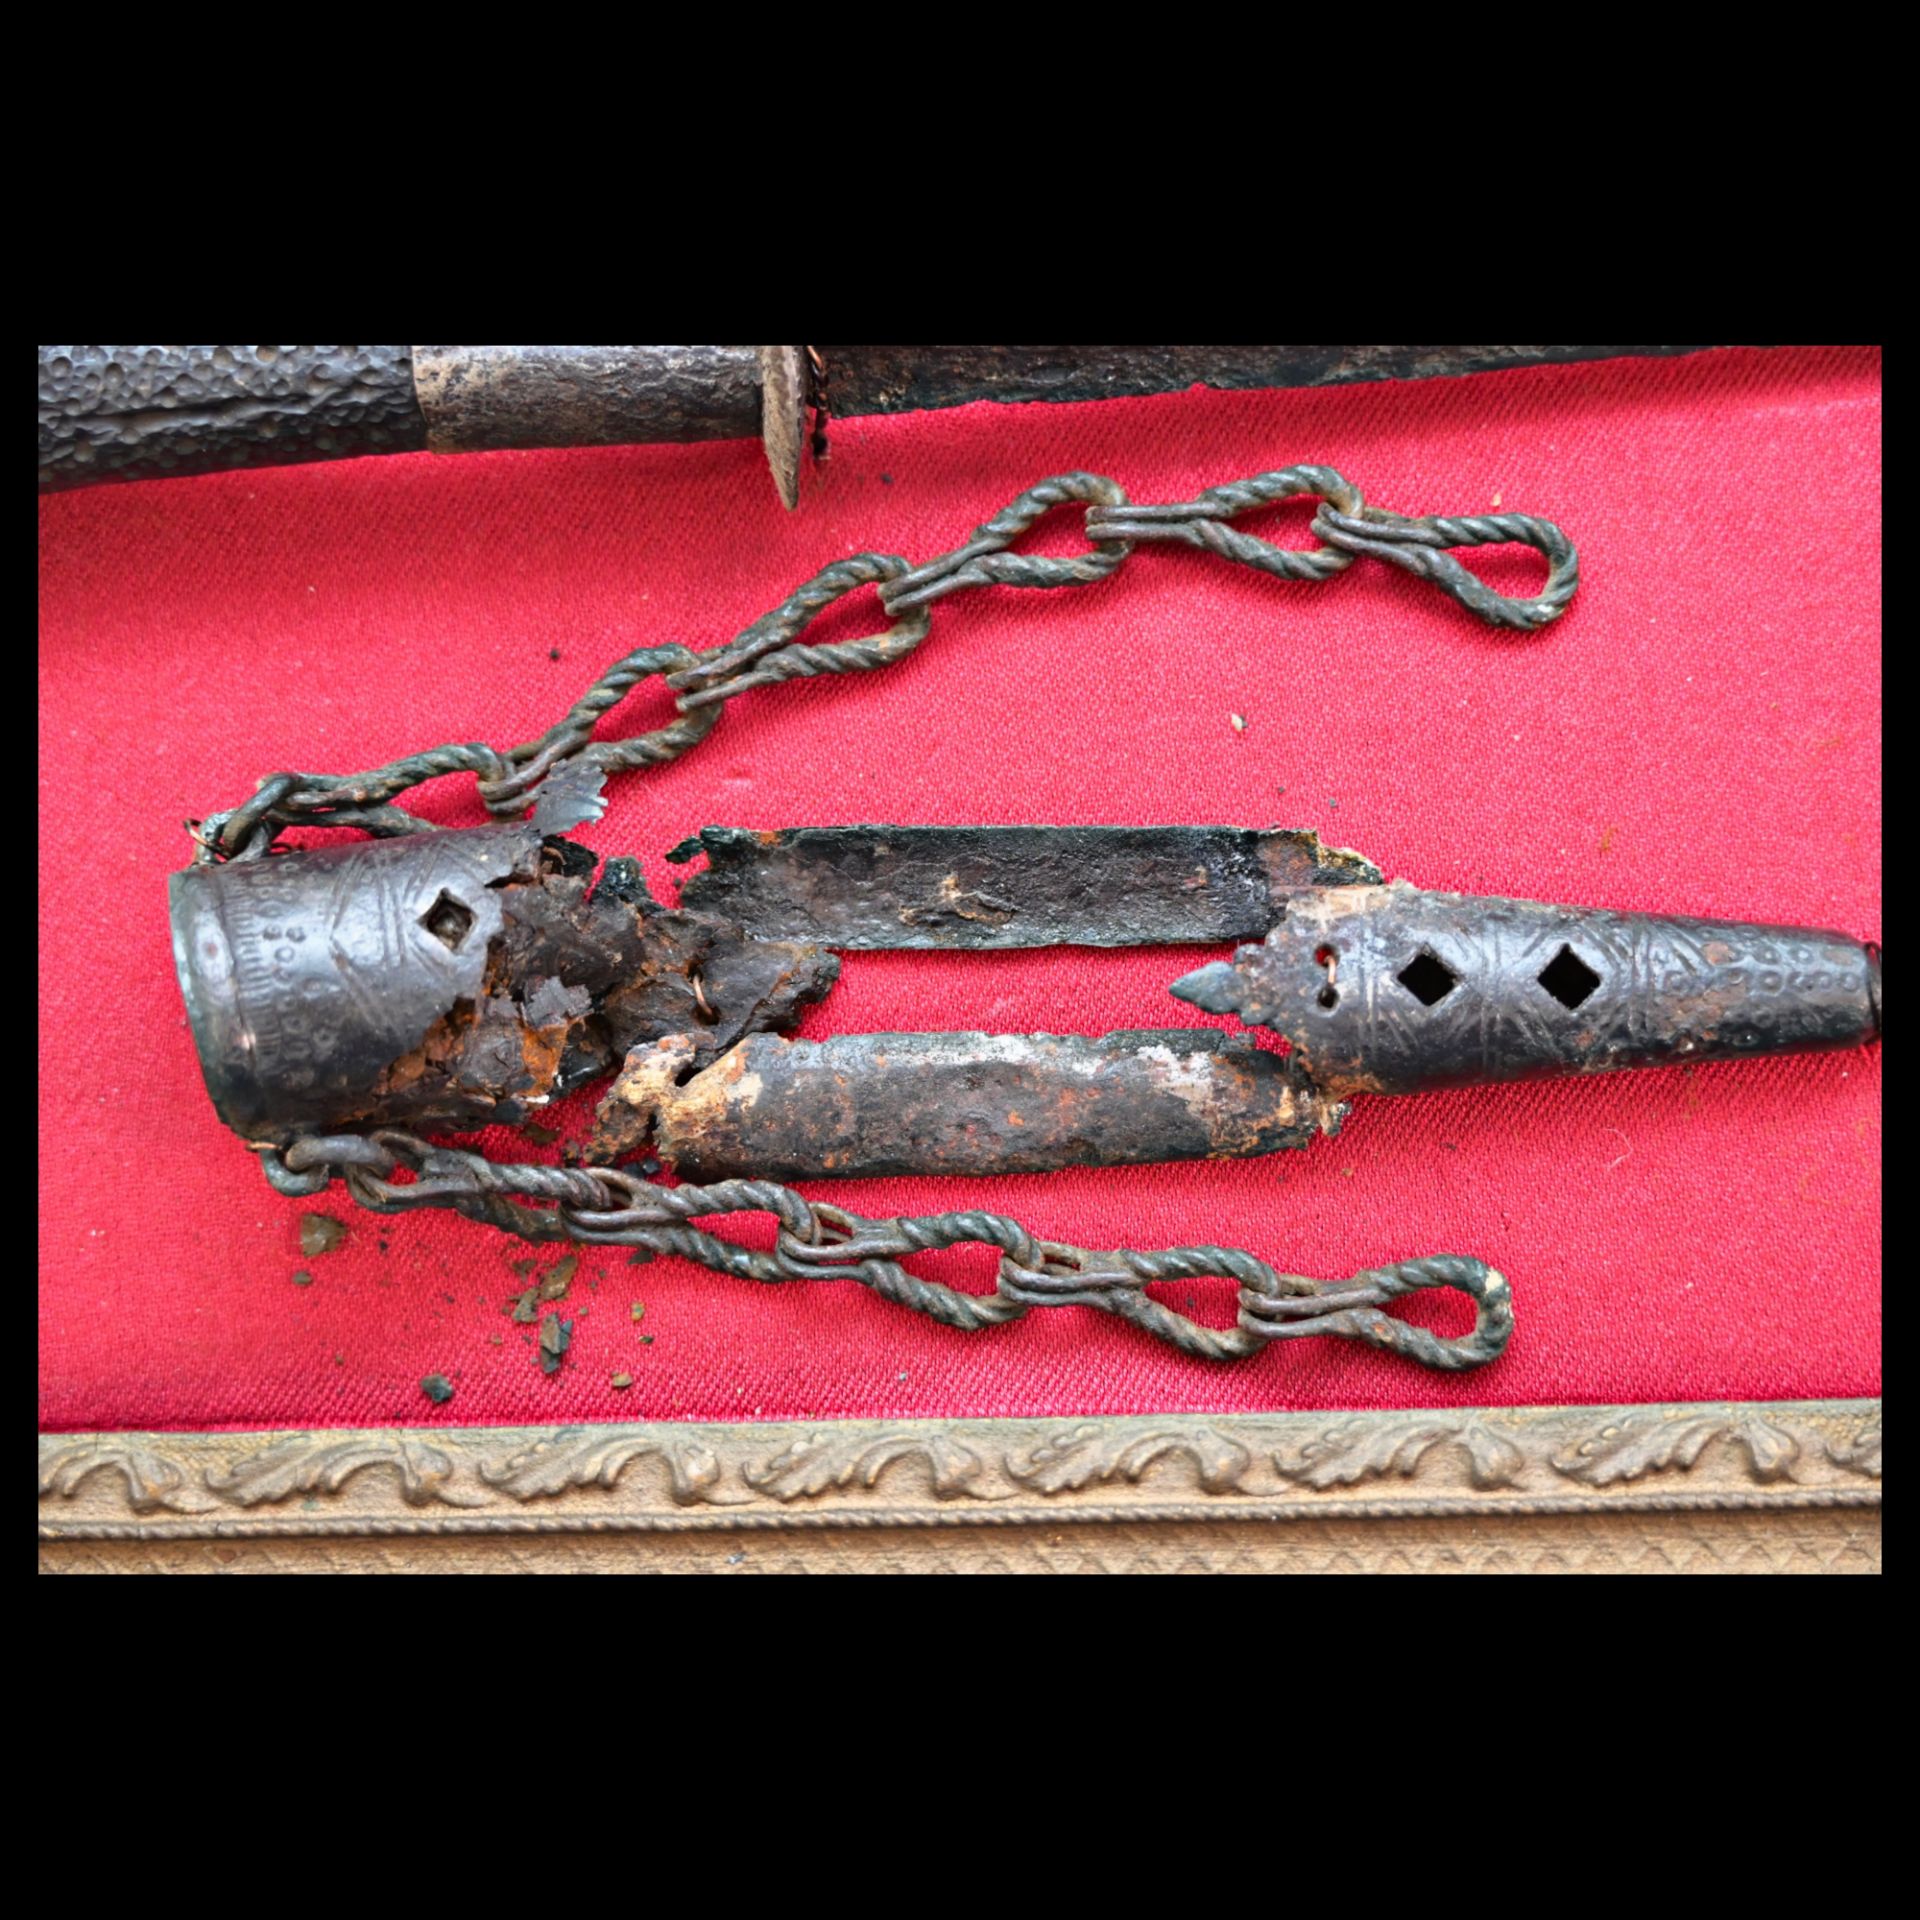 A very rare Medieval Western Europe rondel dagger with wooden grip and scabbard details 14th-15th C. - Image 4 of 7